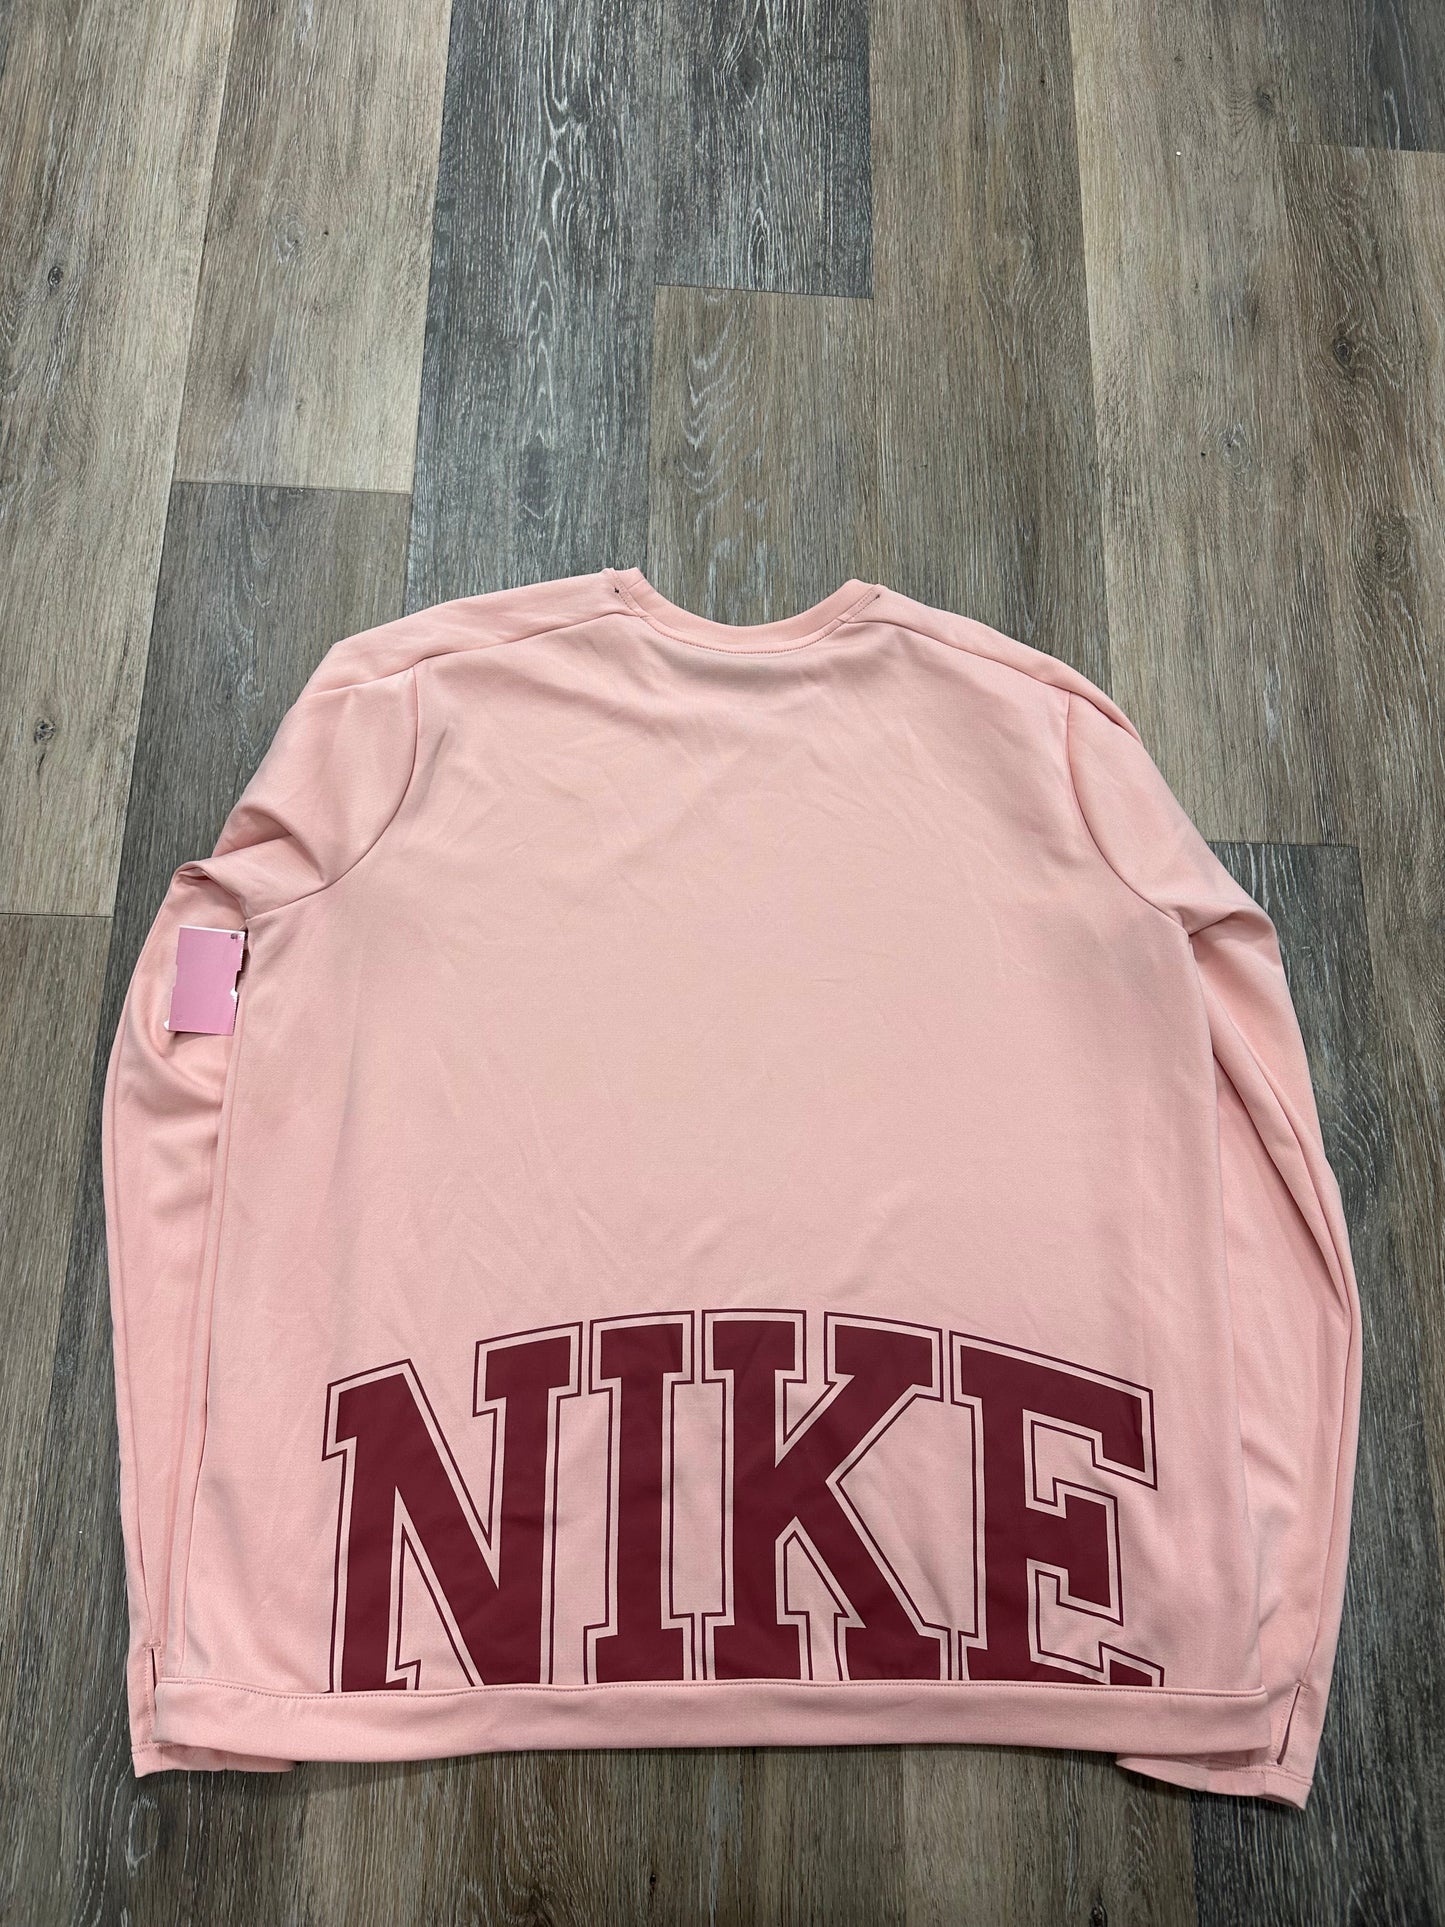 Athletic Top Long Sleeve Crewneck By Nike  Size: Xl